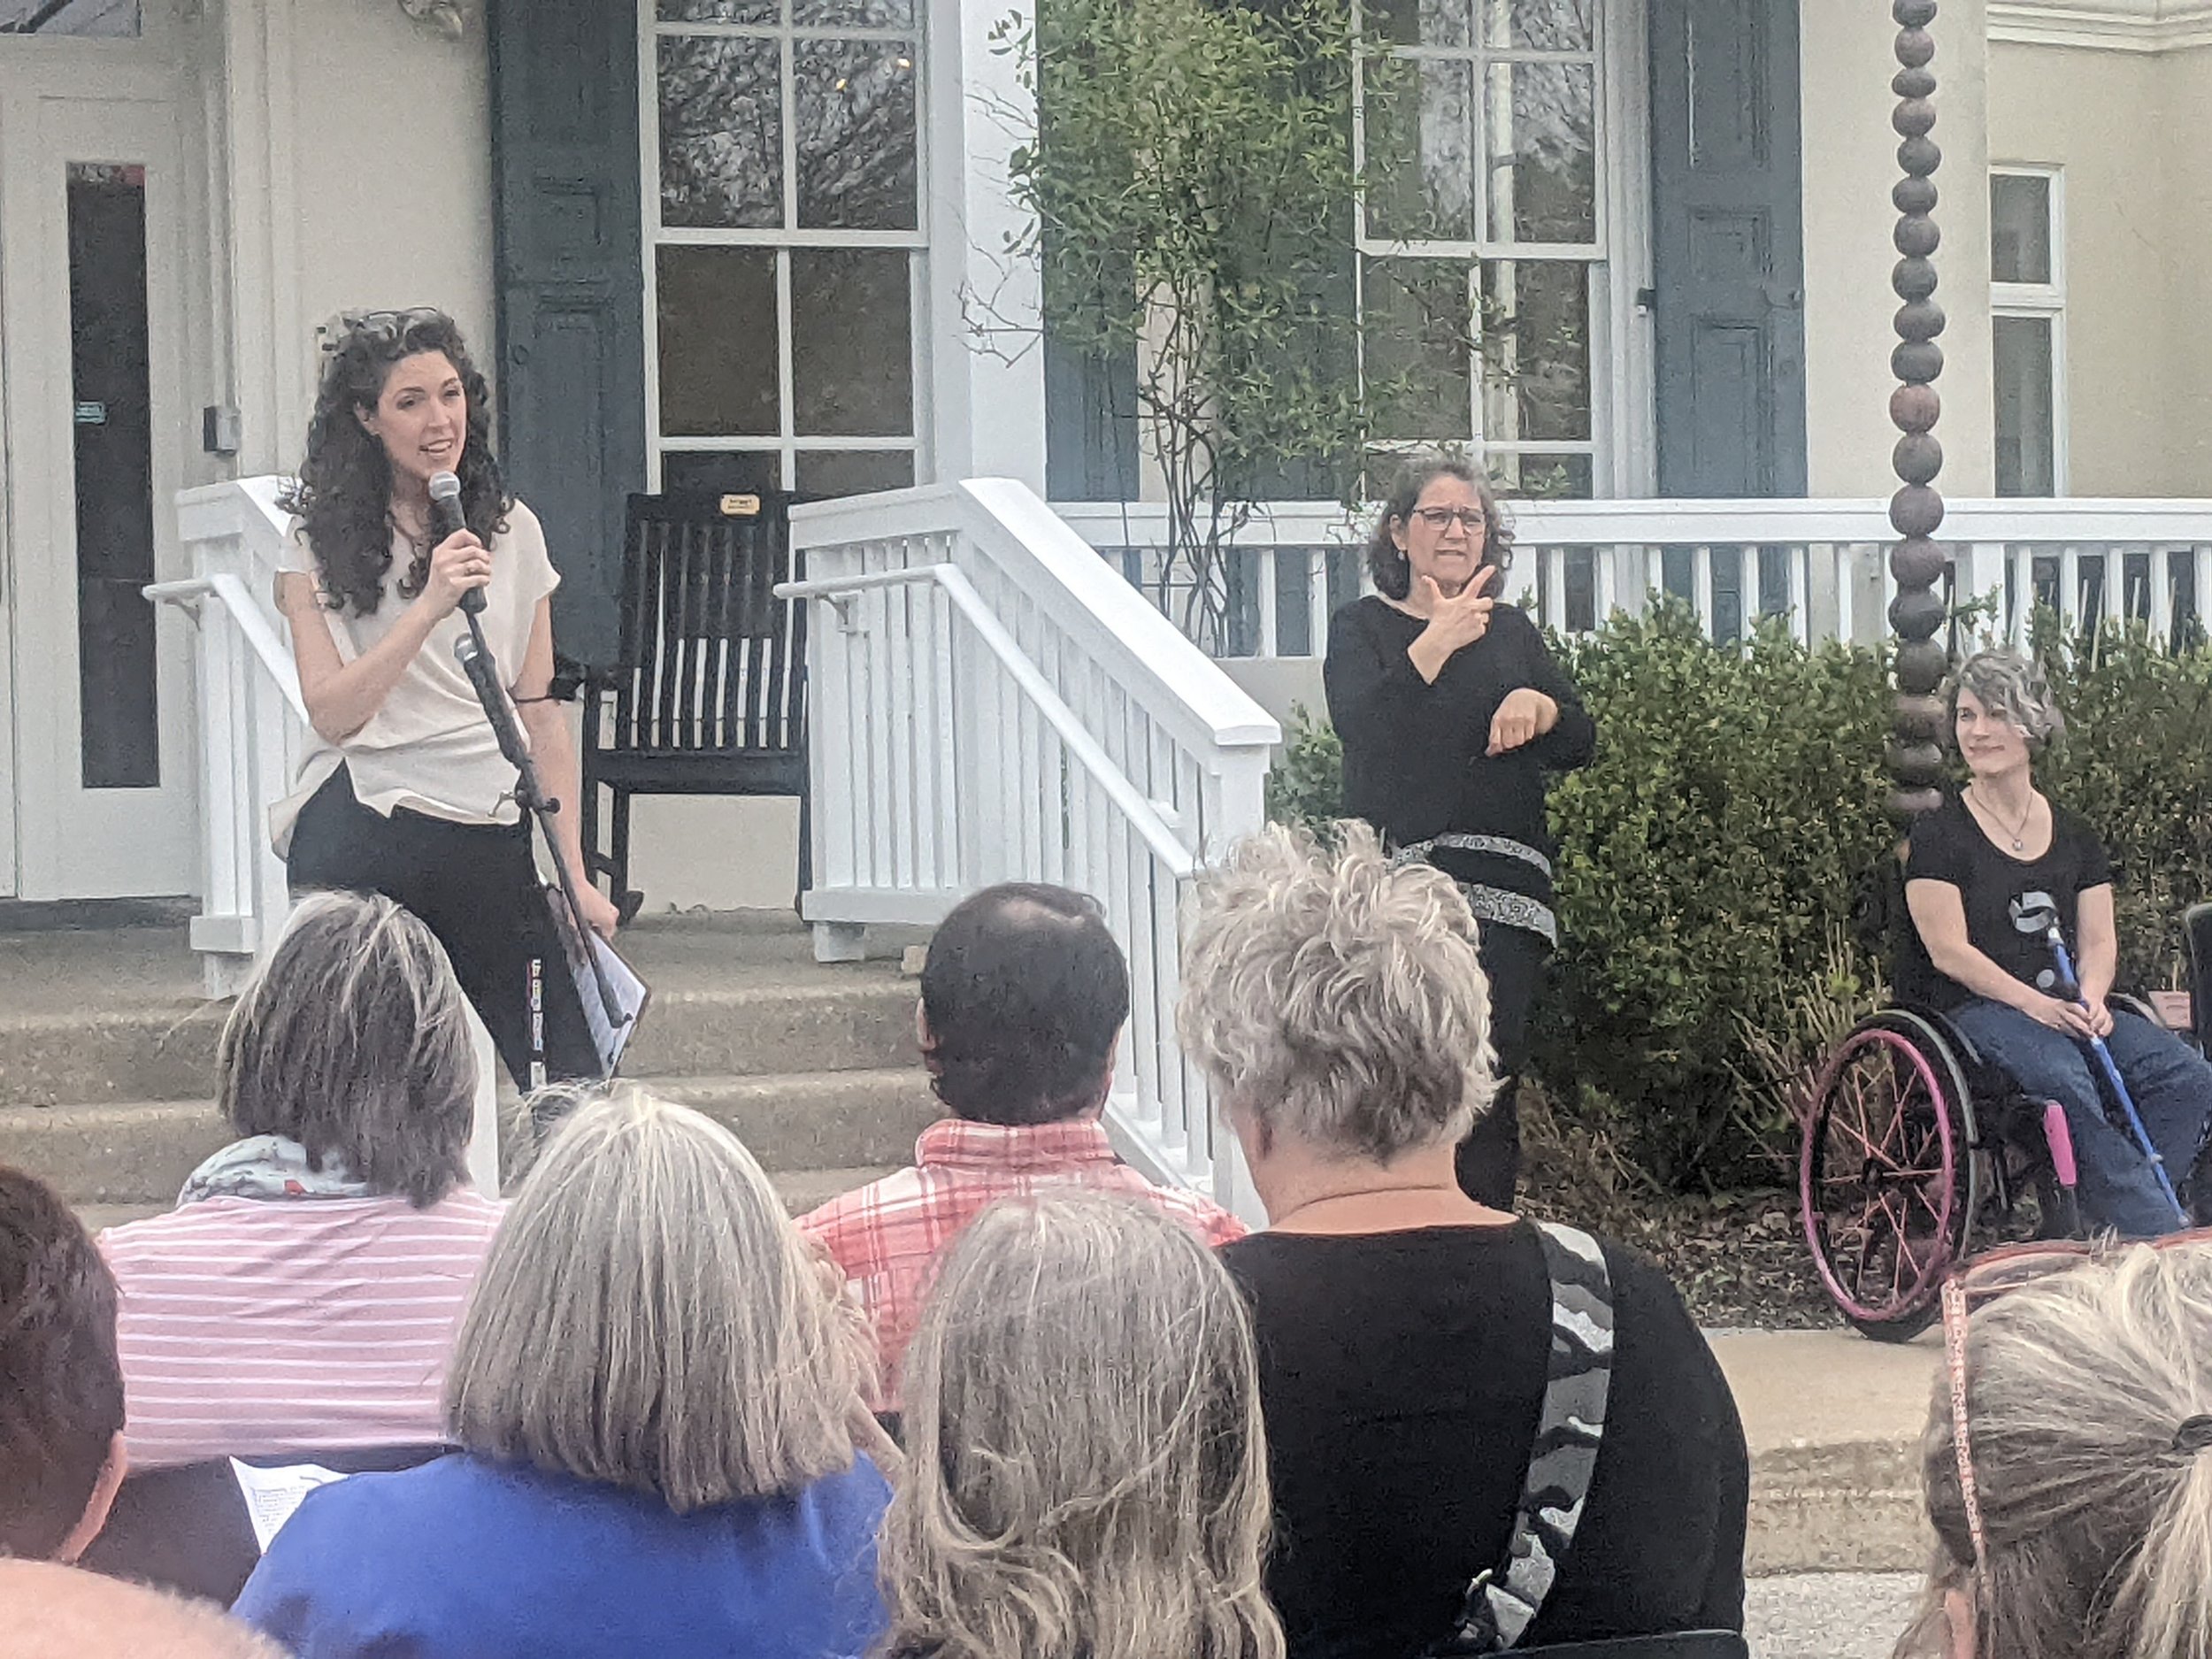  Live H-CAN Story Share Event on May 1, 2022. A collaboration by H-CAN’s Arts Advocacy and Disability &amp; Accessibility action groups, this project was developed to help strengthen the H-CAN community by offering space for members and friends to sh